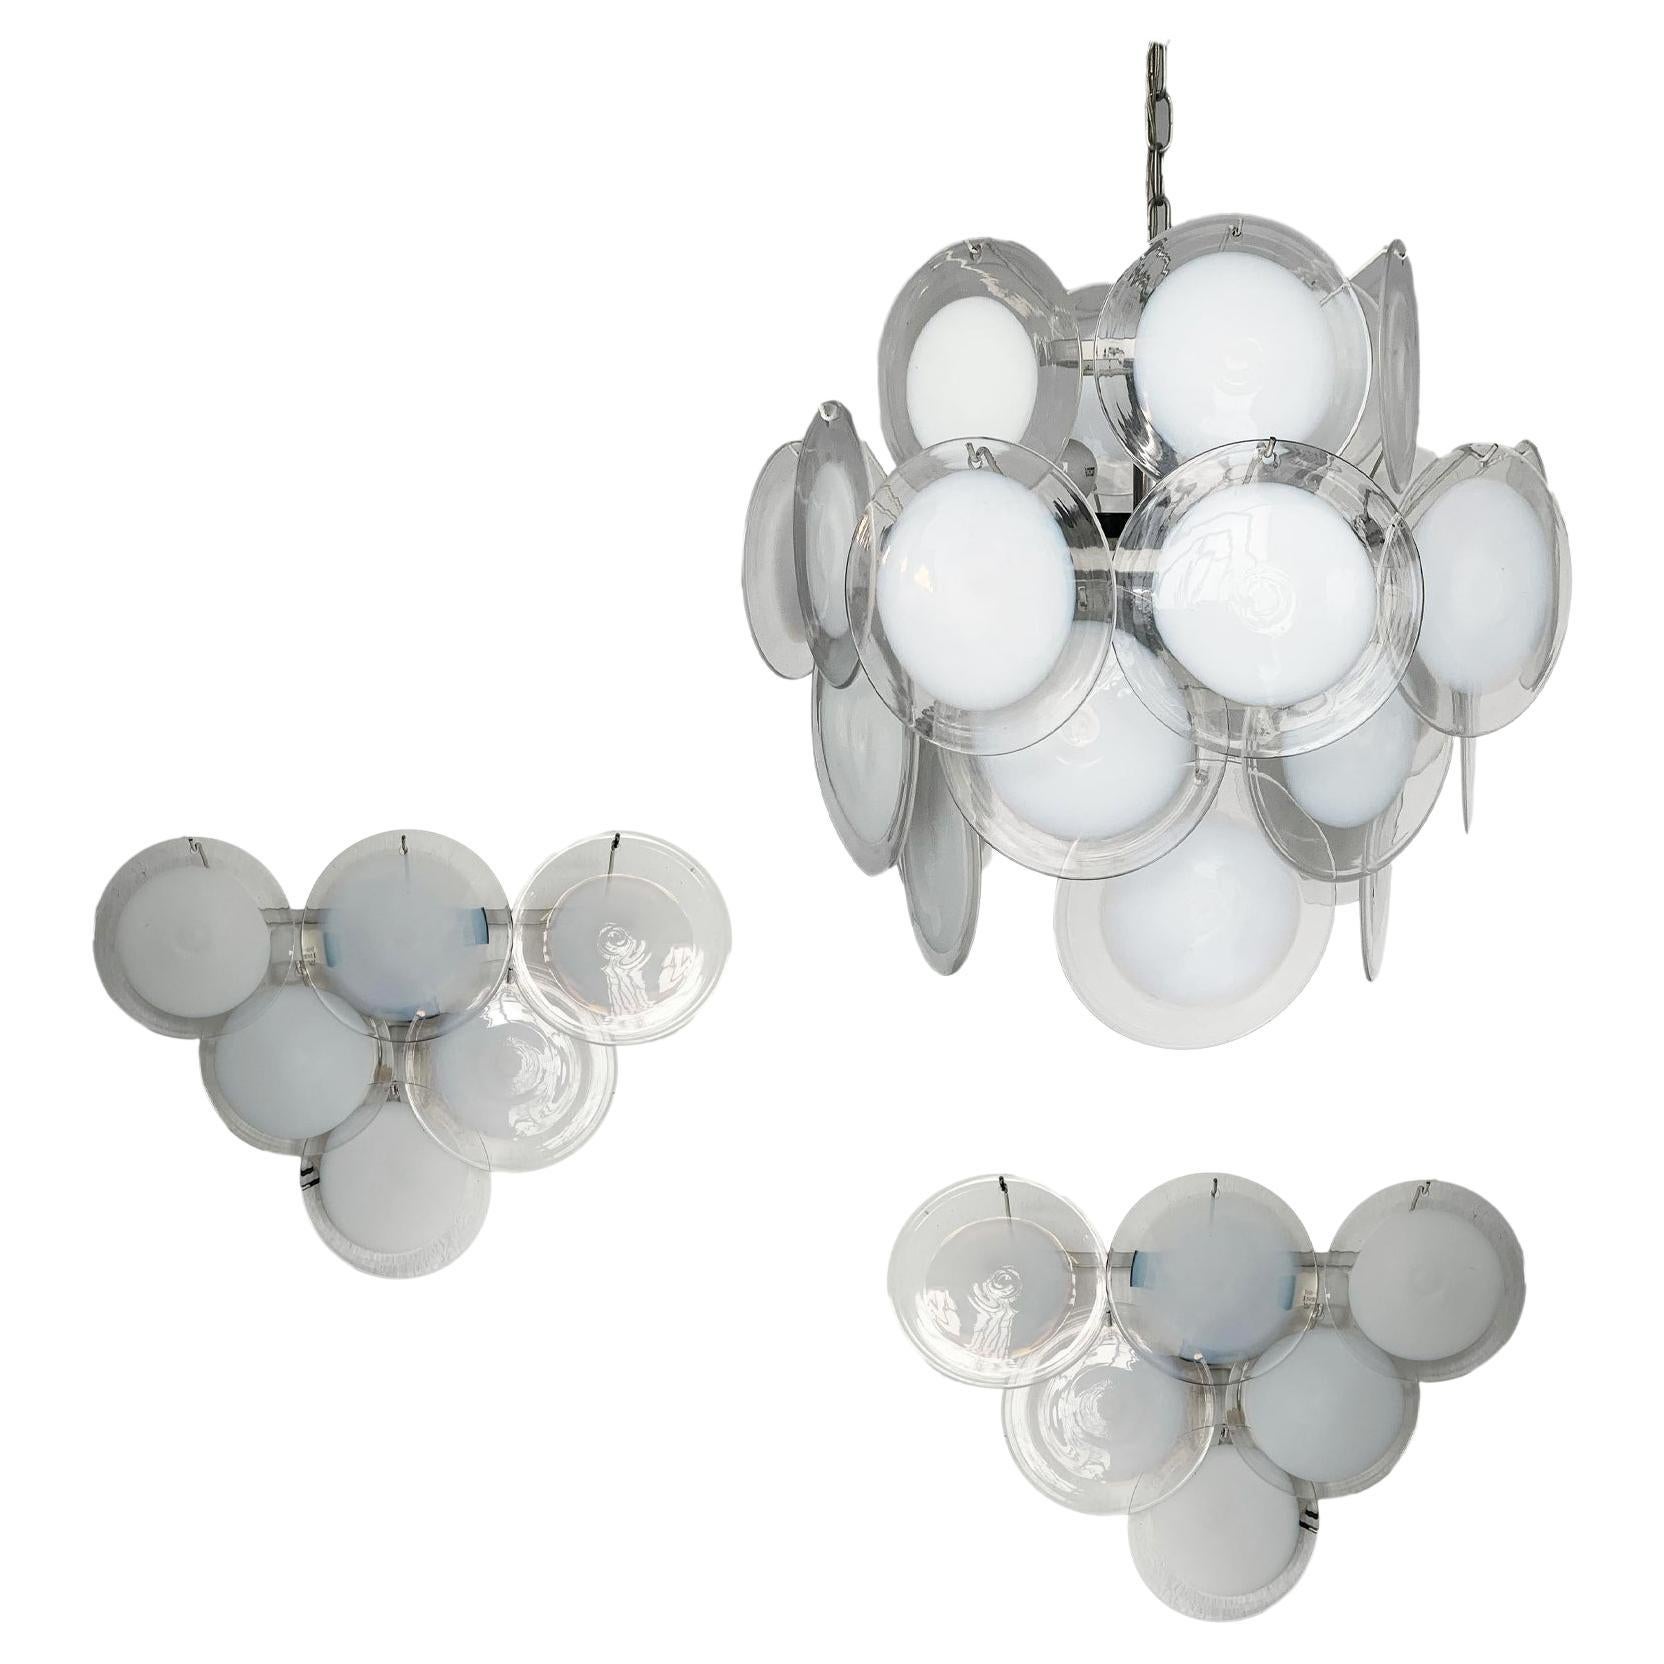 Rare Set of Two Murano Glass Sconces and One Pendant Chandelier by Gino Vistosi